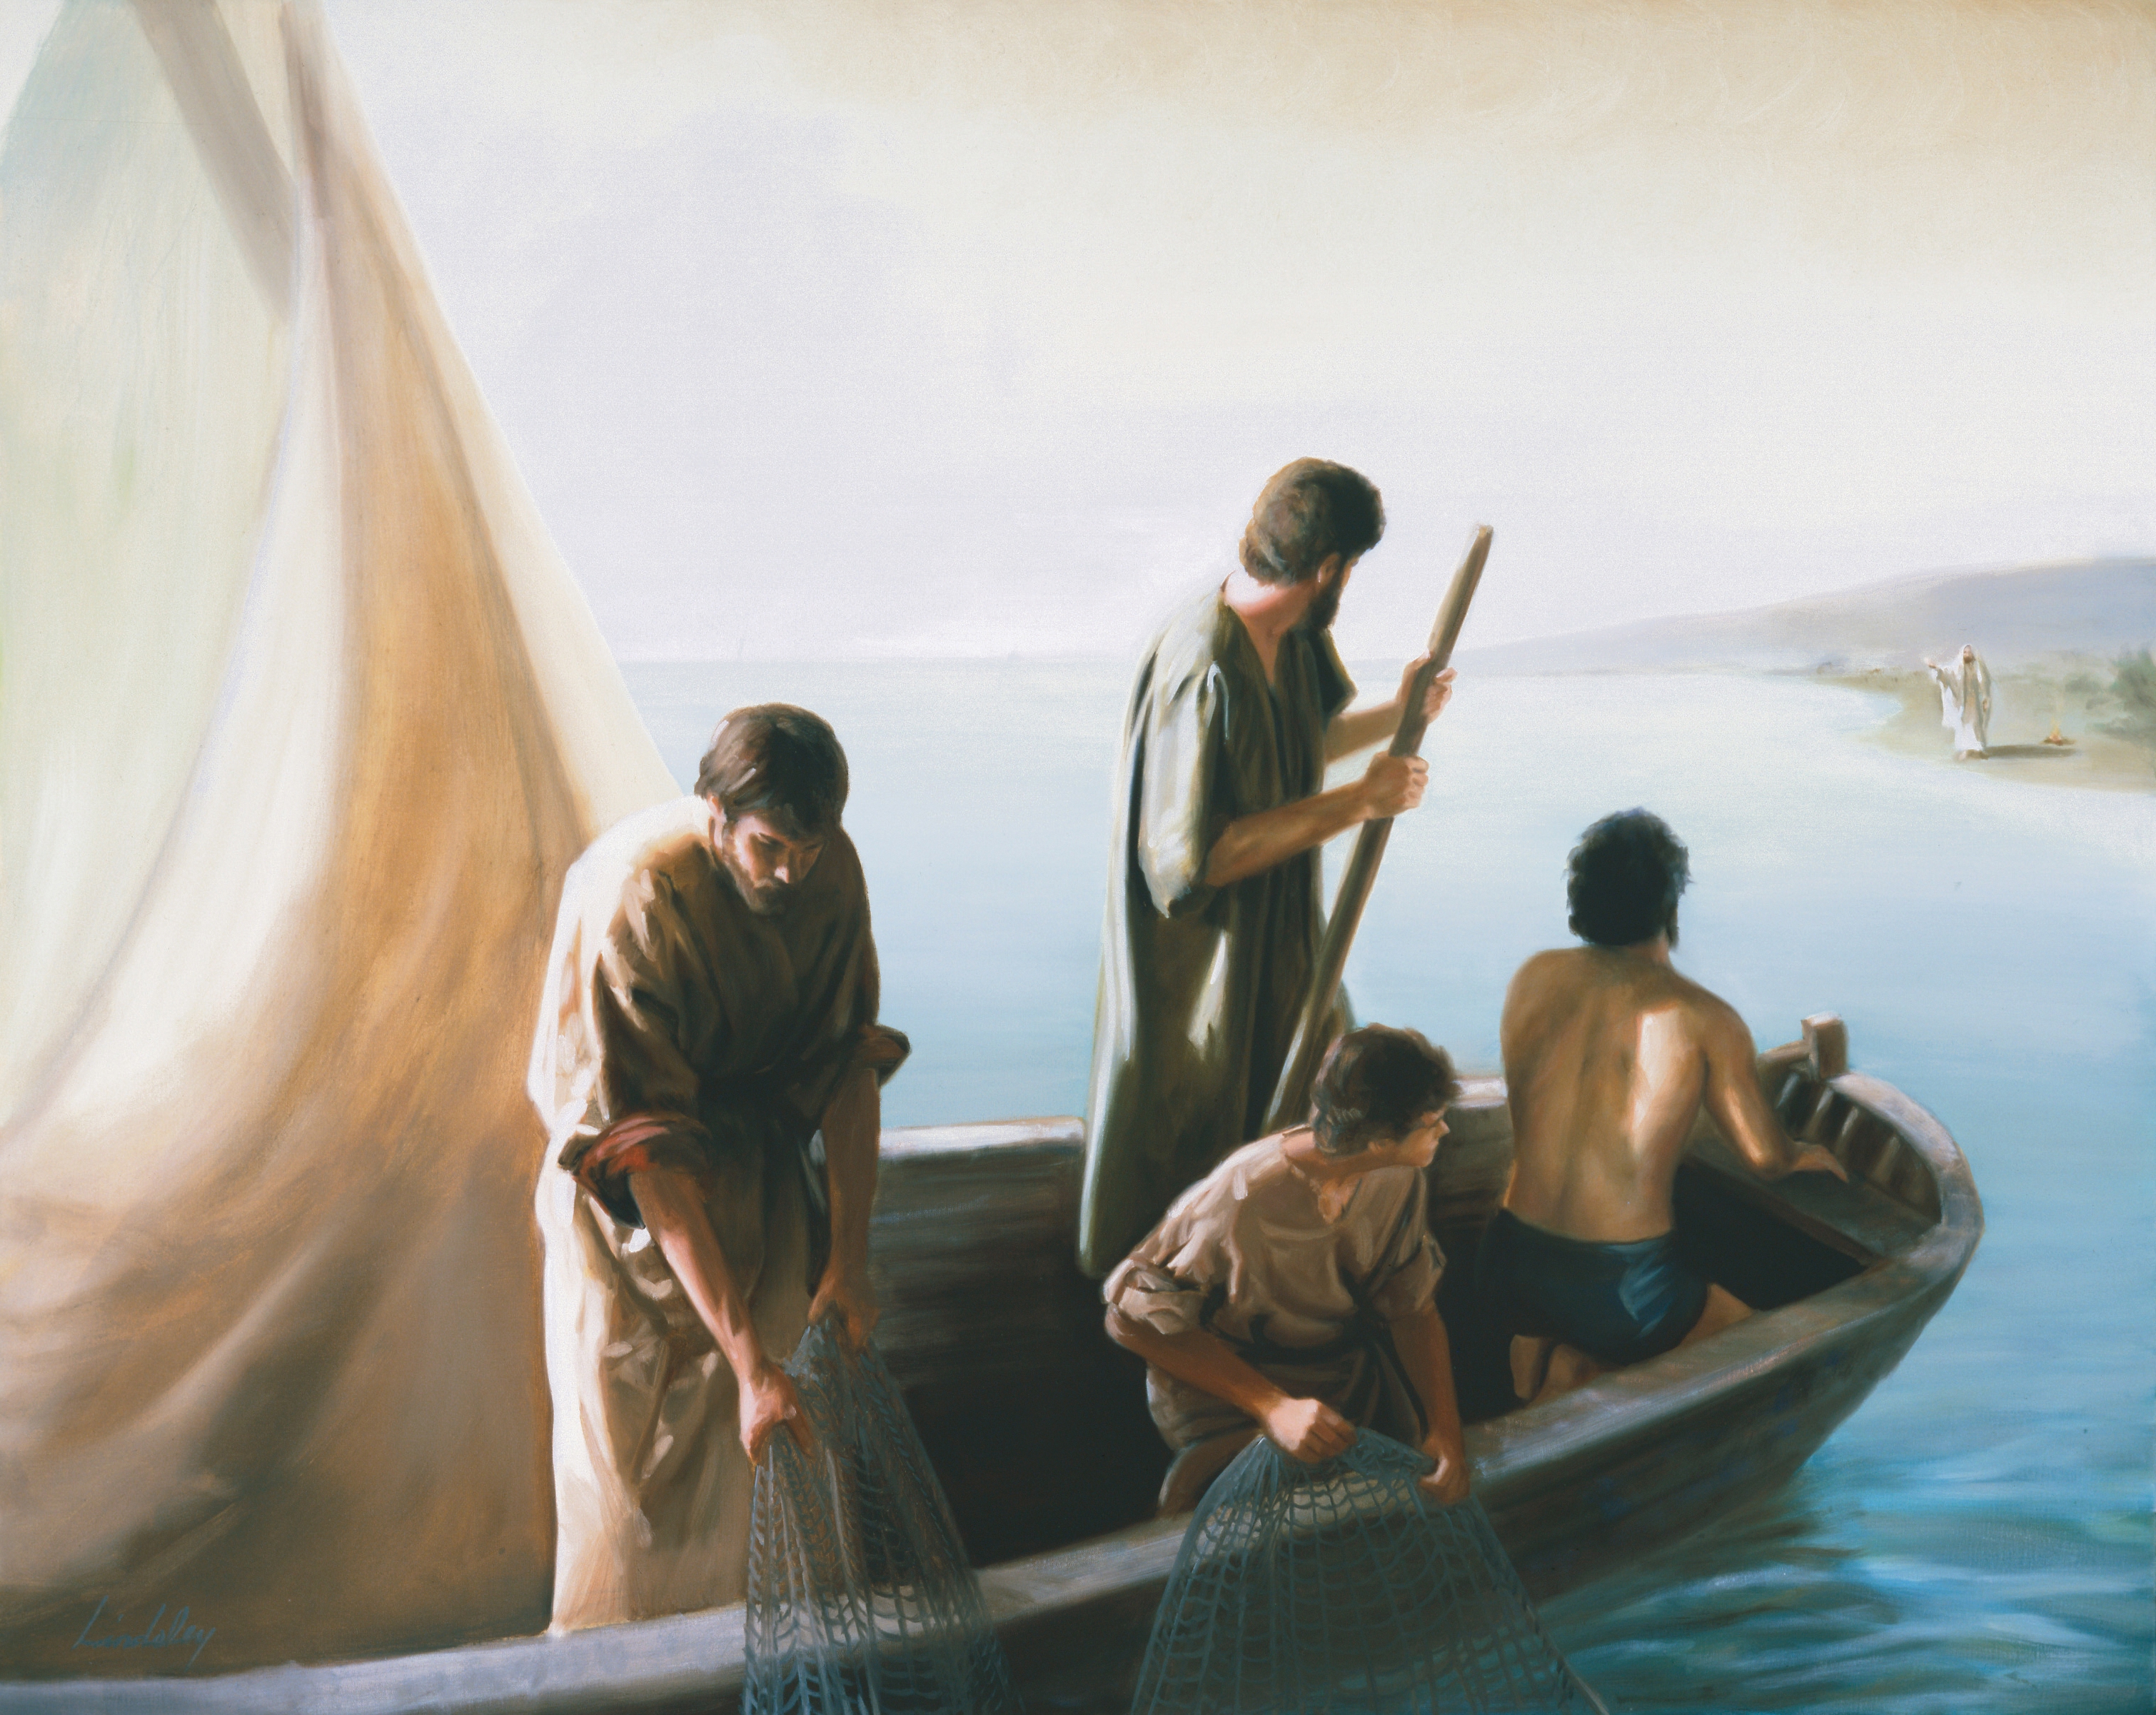 A painting by David Lindsley depicting four of the original twelve apostles in a small fishing boat on the Sea of Tiberias.